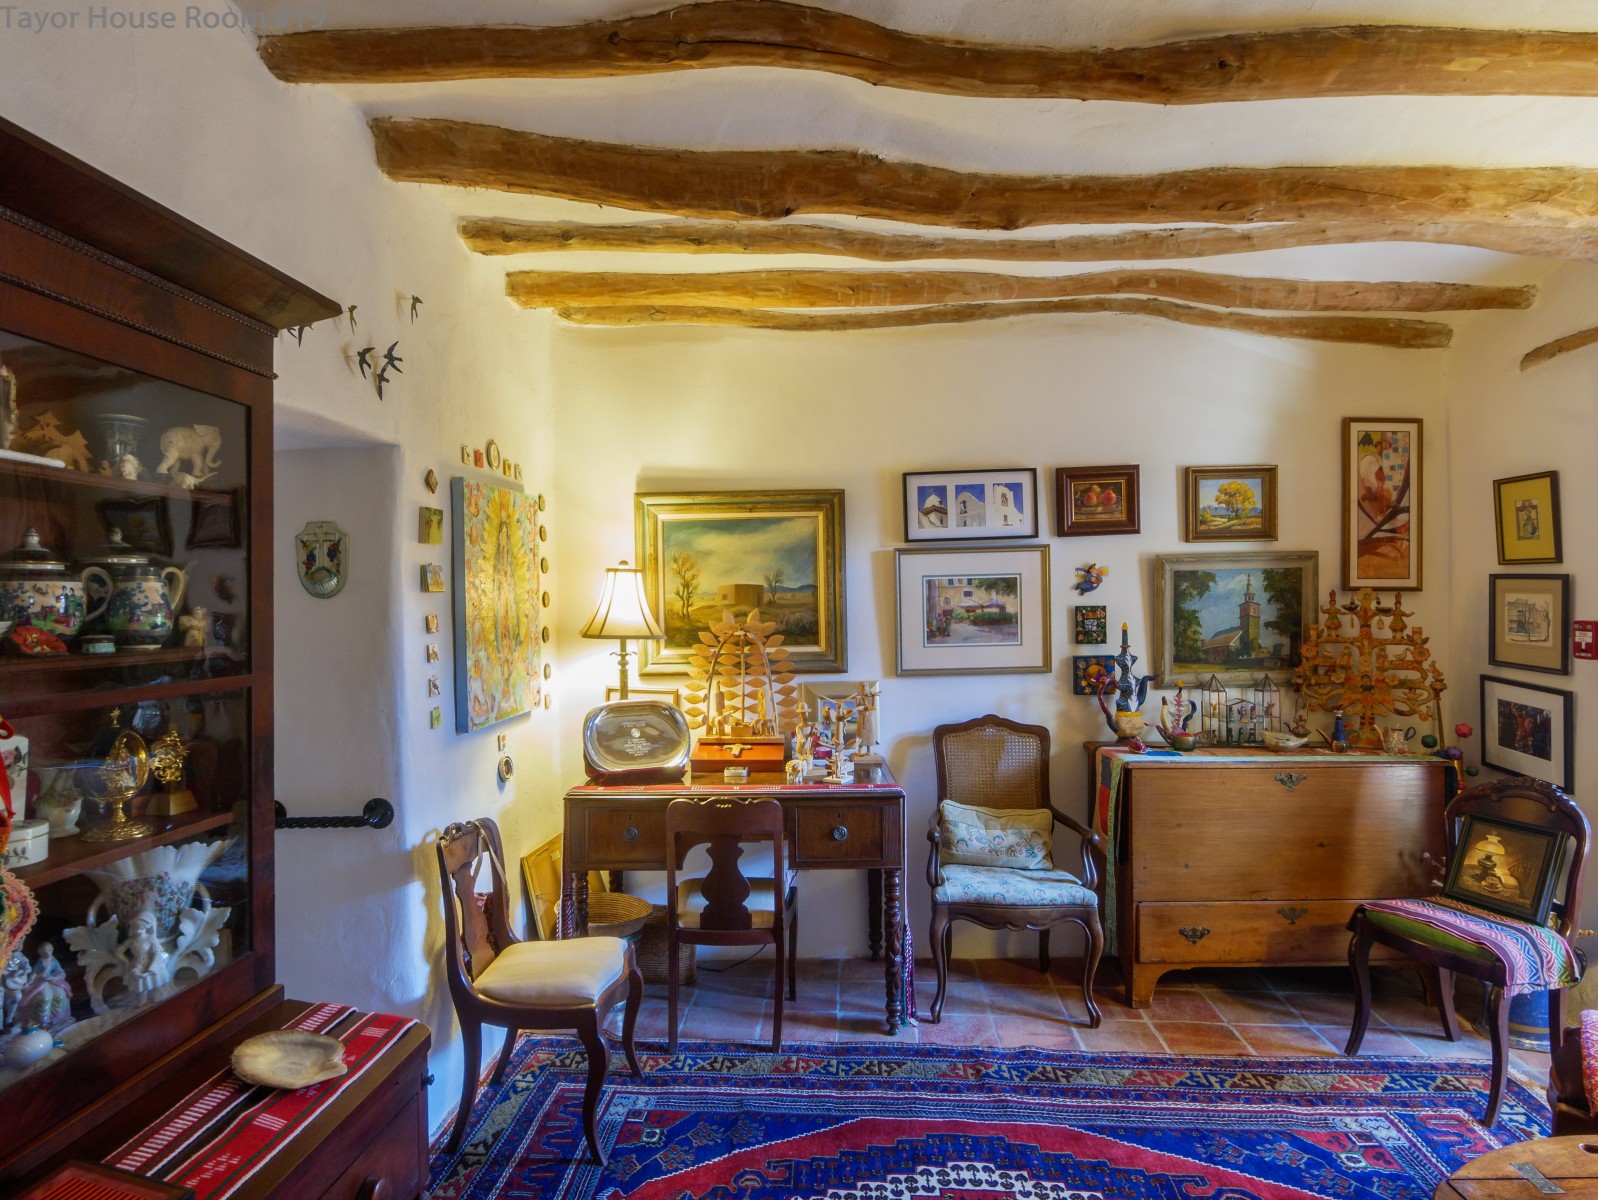 The Sitting Room at the Taylor-Mesilla Historic Property. Photo by Tom Conelly.